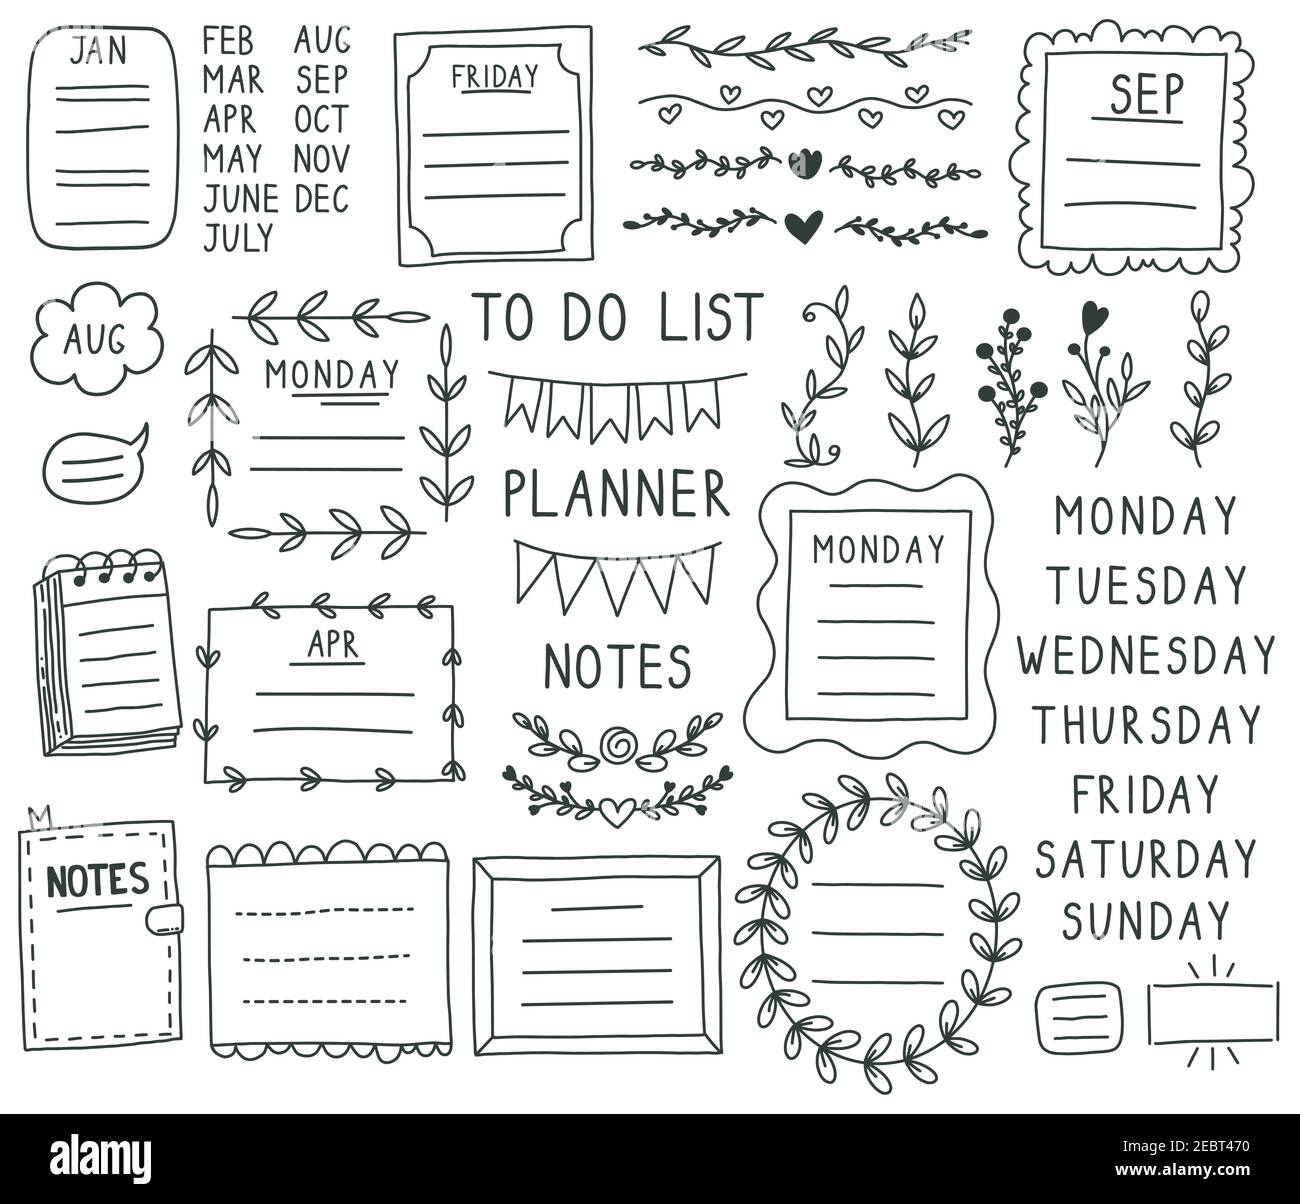 Artistic Planning at Its Best: Must-Have Bullet Journal Printable Templates  - Aesthetic Creative Journaling — DIAxNA